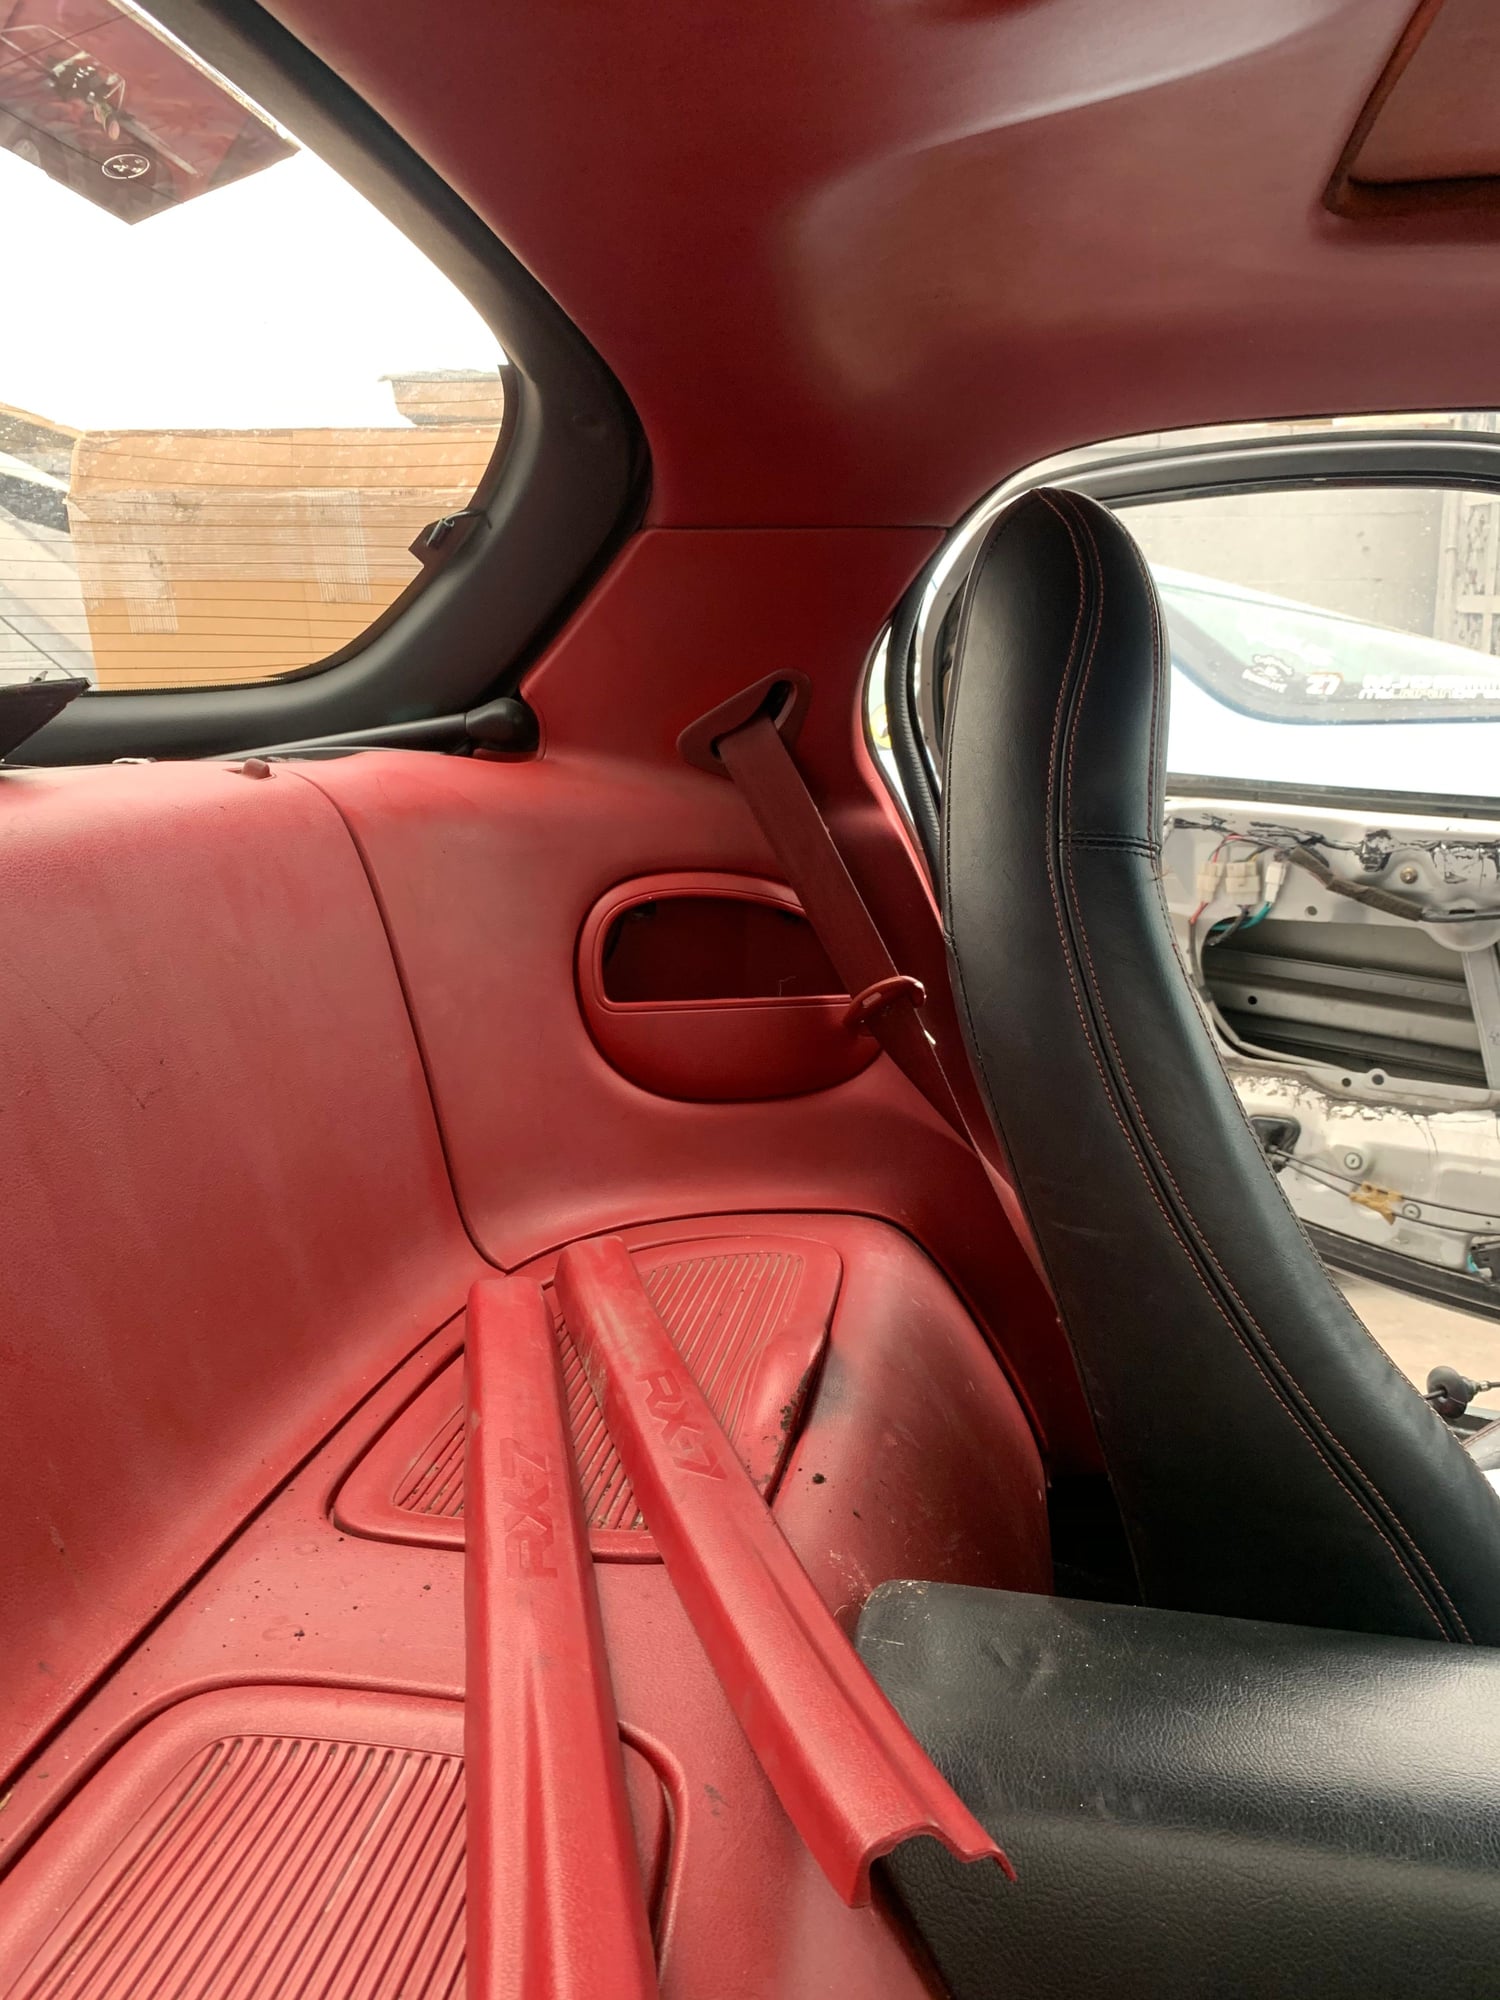 Interior/Upholstery - WTT or WTS Red interior pieces for black - Used - 1993 to 2002 Mazda RX-7 - La, CA 91406, United States